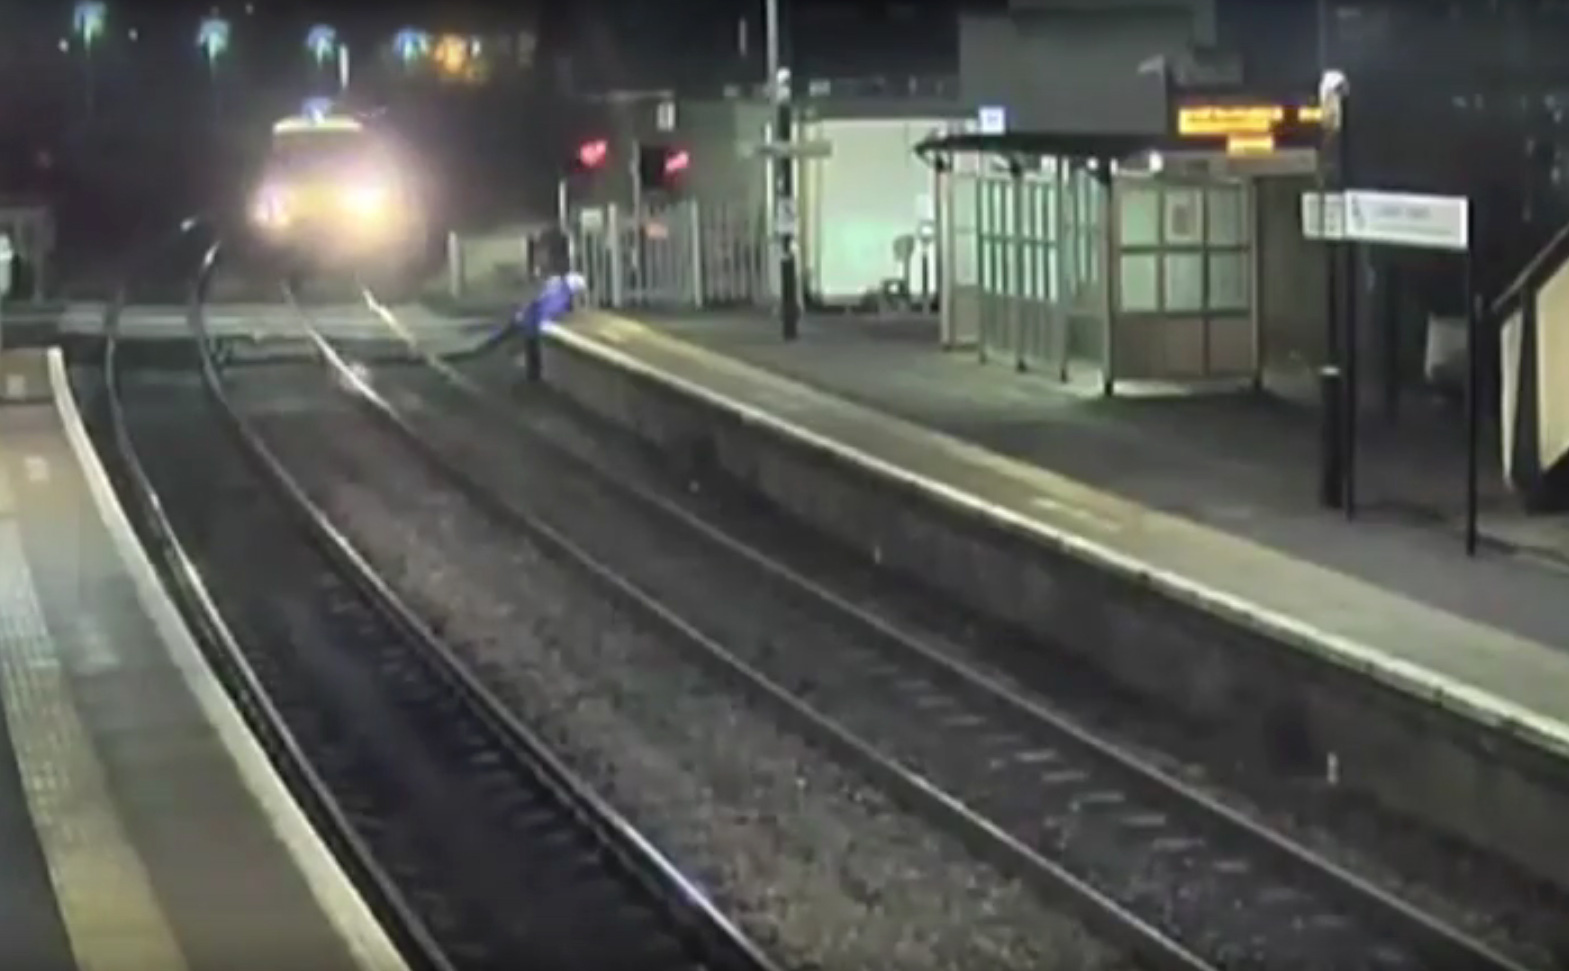 An average of one person encroaches on the tracks every hour (British Transport Police/PA Wire)